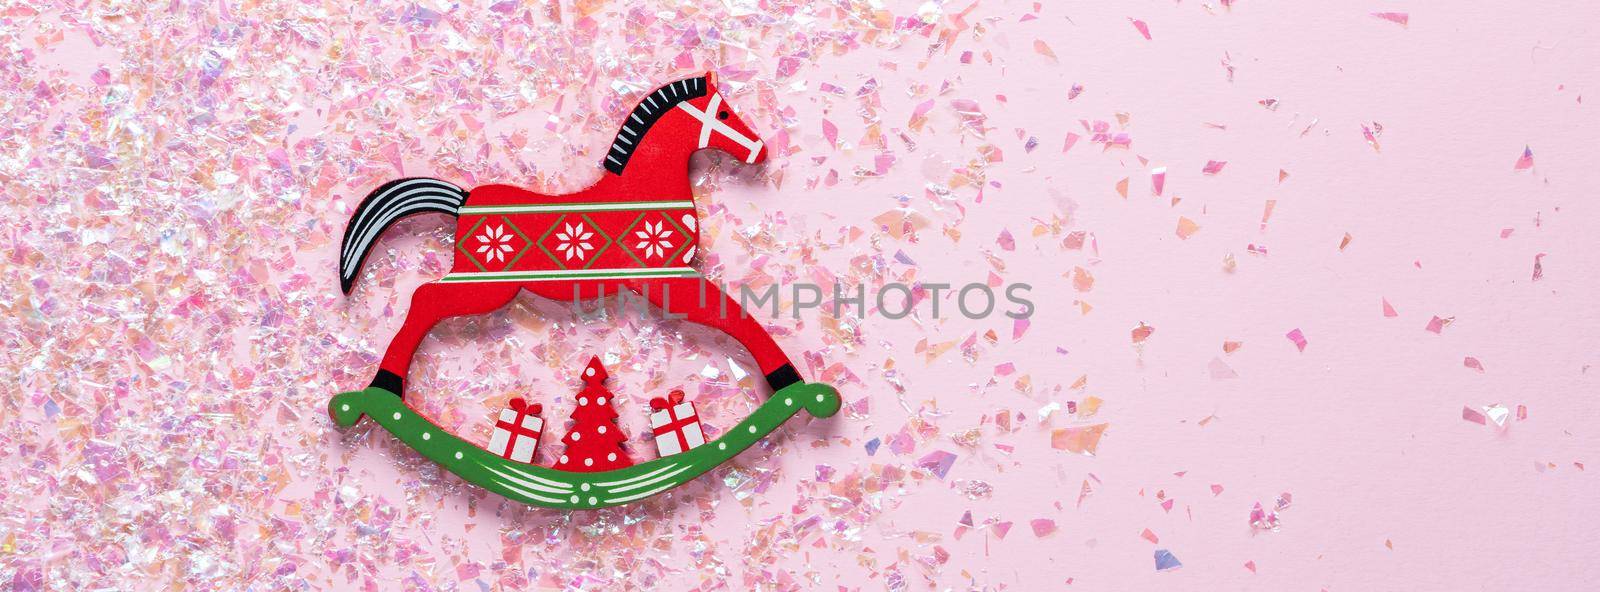 Christmas tree toy of Rocking horse on pink background with glitter